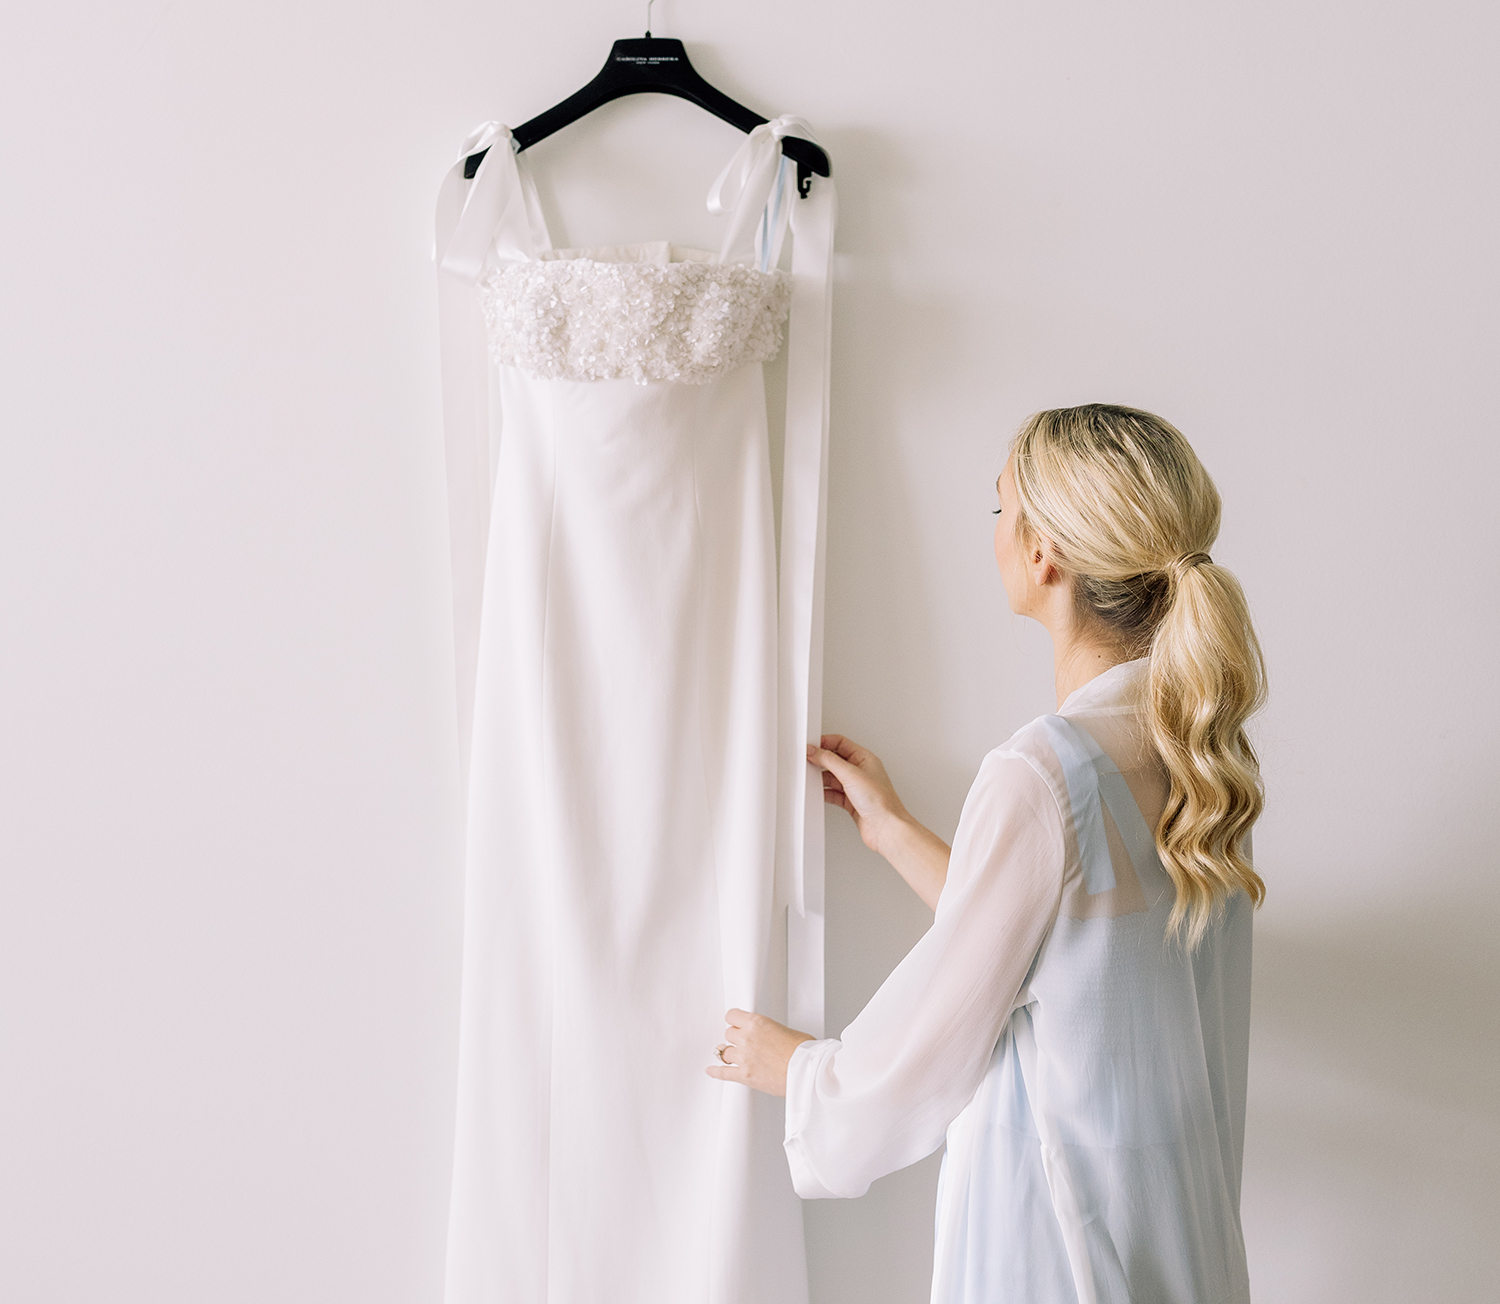 The Number 1 Mistake Brides Make at Fittings and How to Avoid It